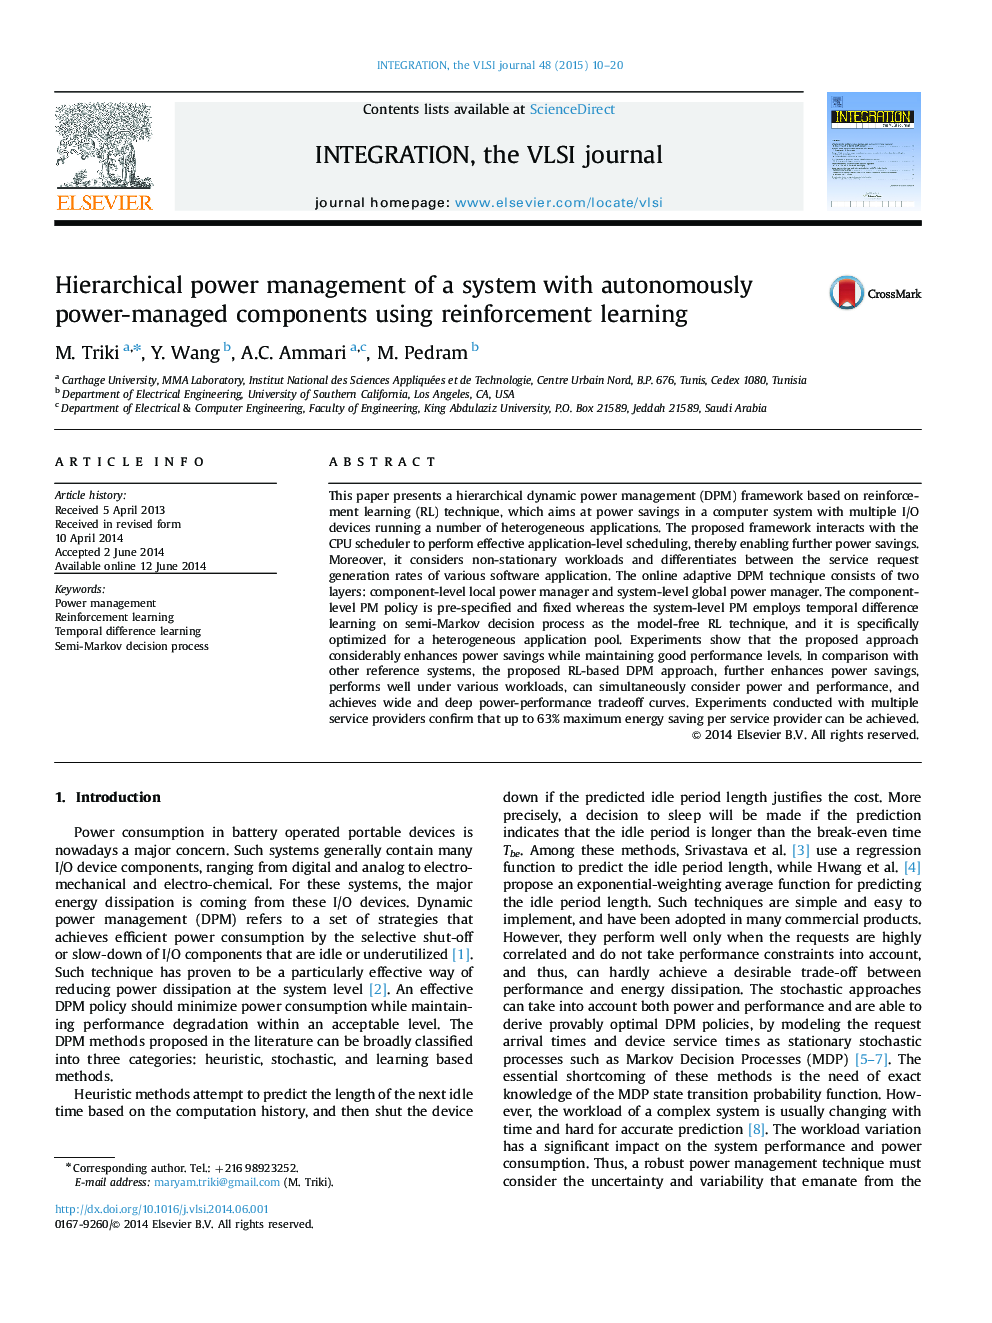 Hierarchical power management of a system with autonomously power-managed components using reinforcement learning